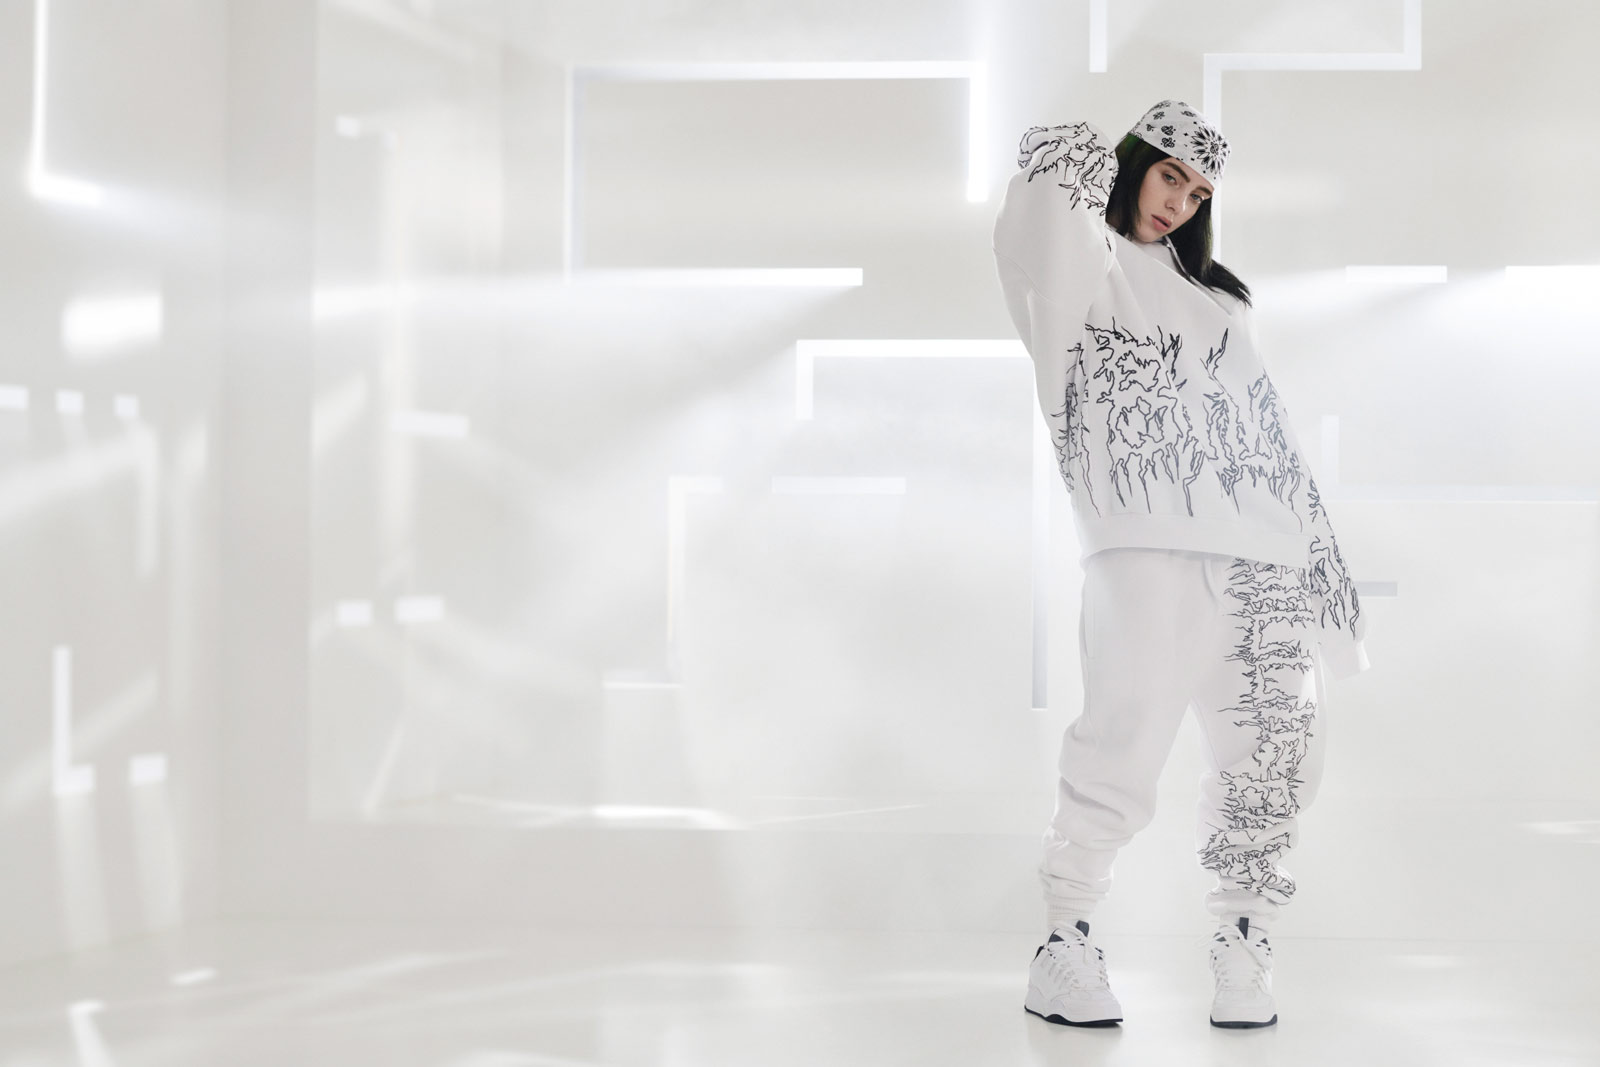 Billie Eilish Just Released A Collaboration With Bershka, And Yep, There Are Flamin’ Lorts